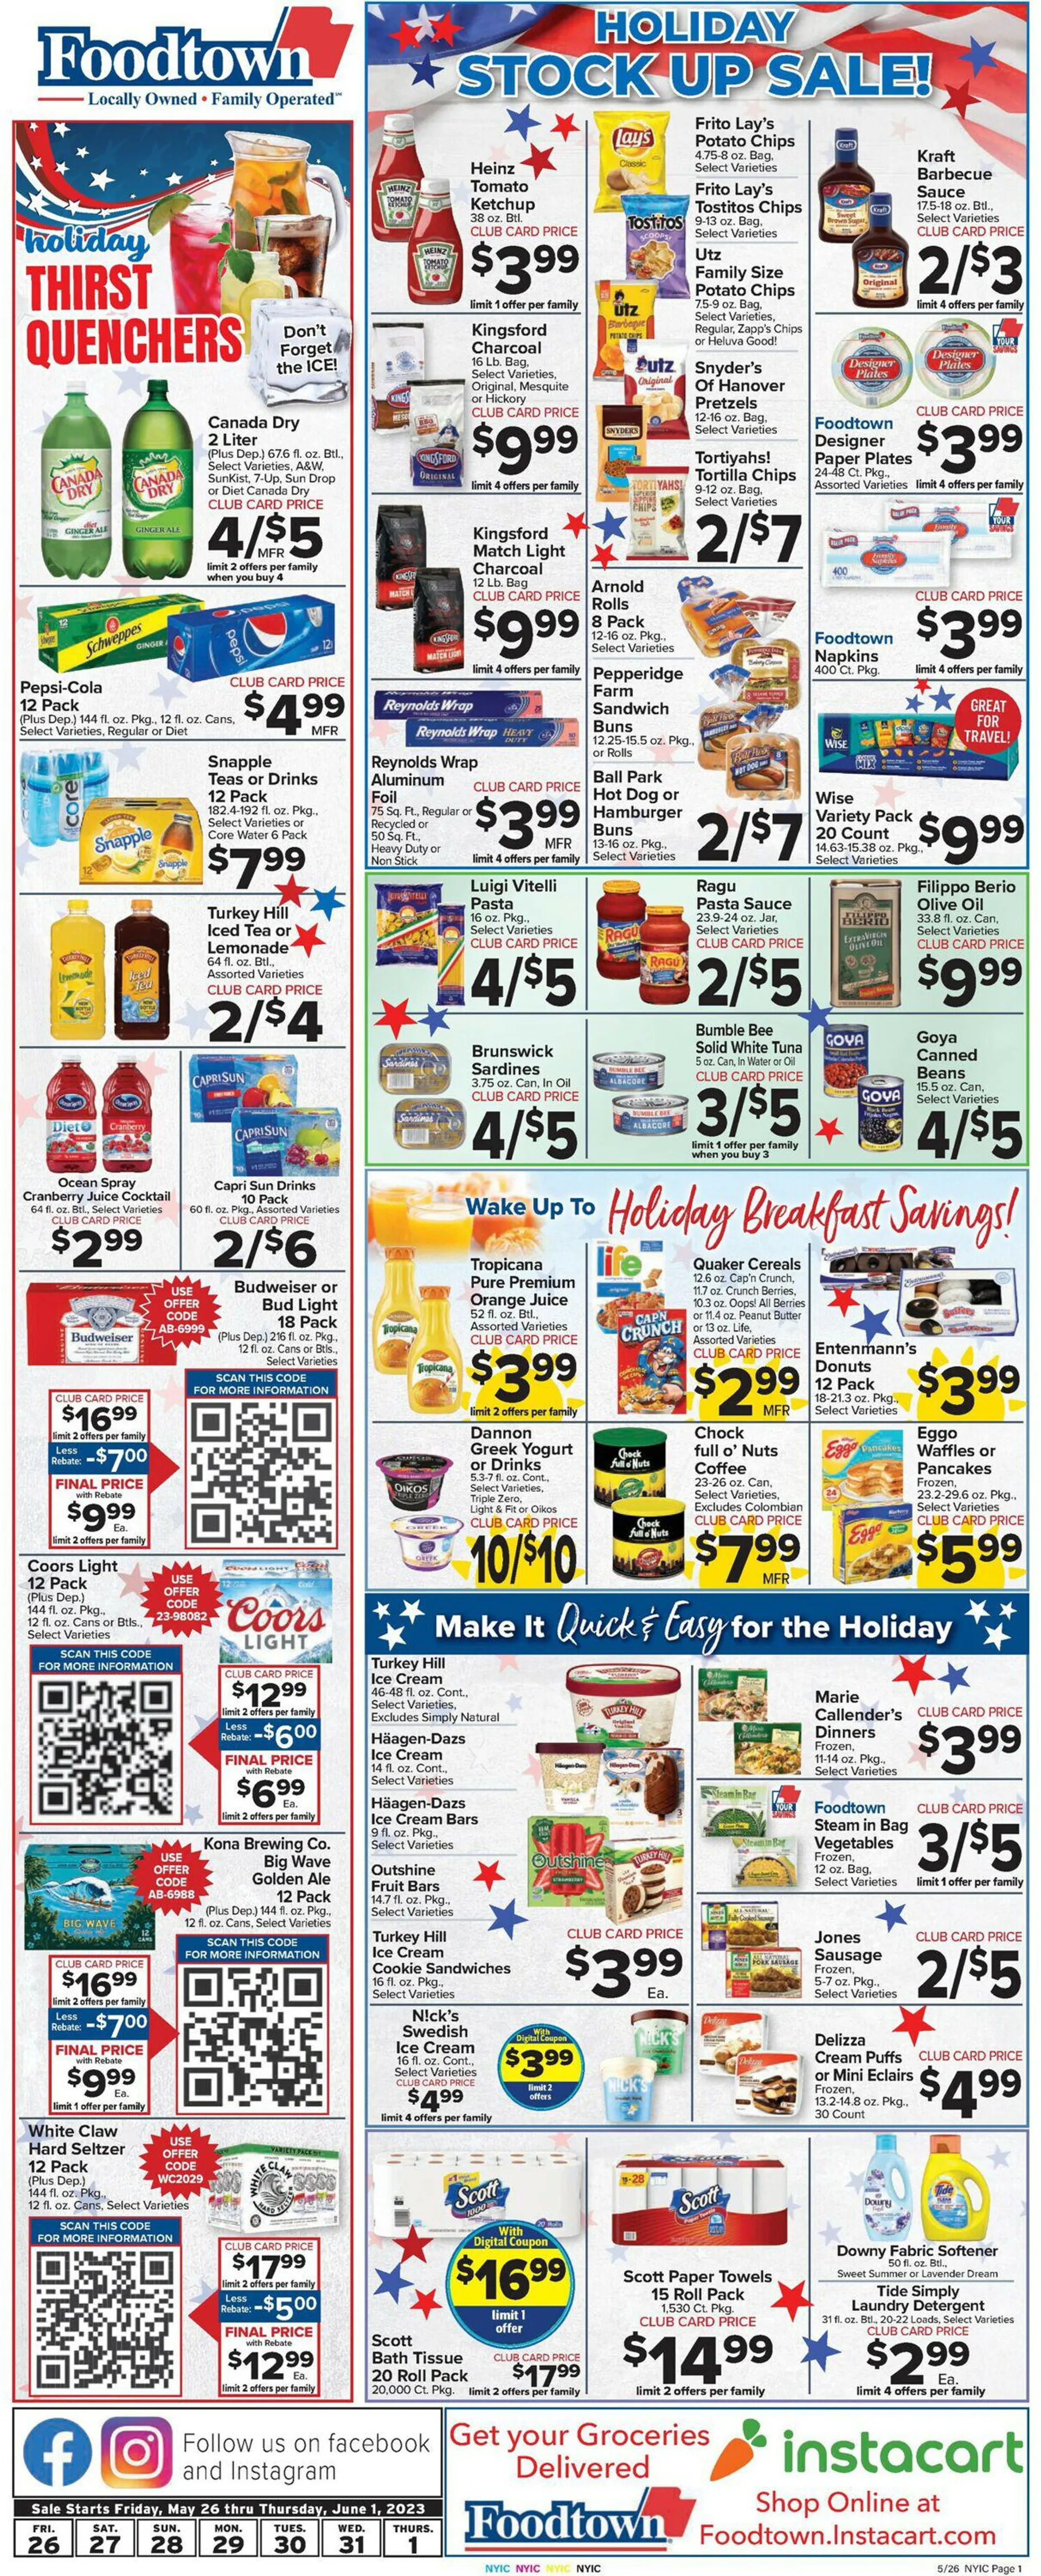 Foodtown Current weekly ad - 3